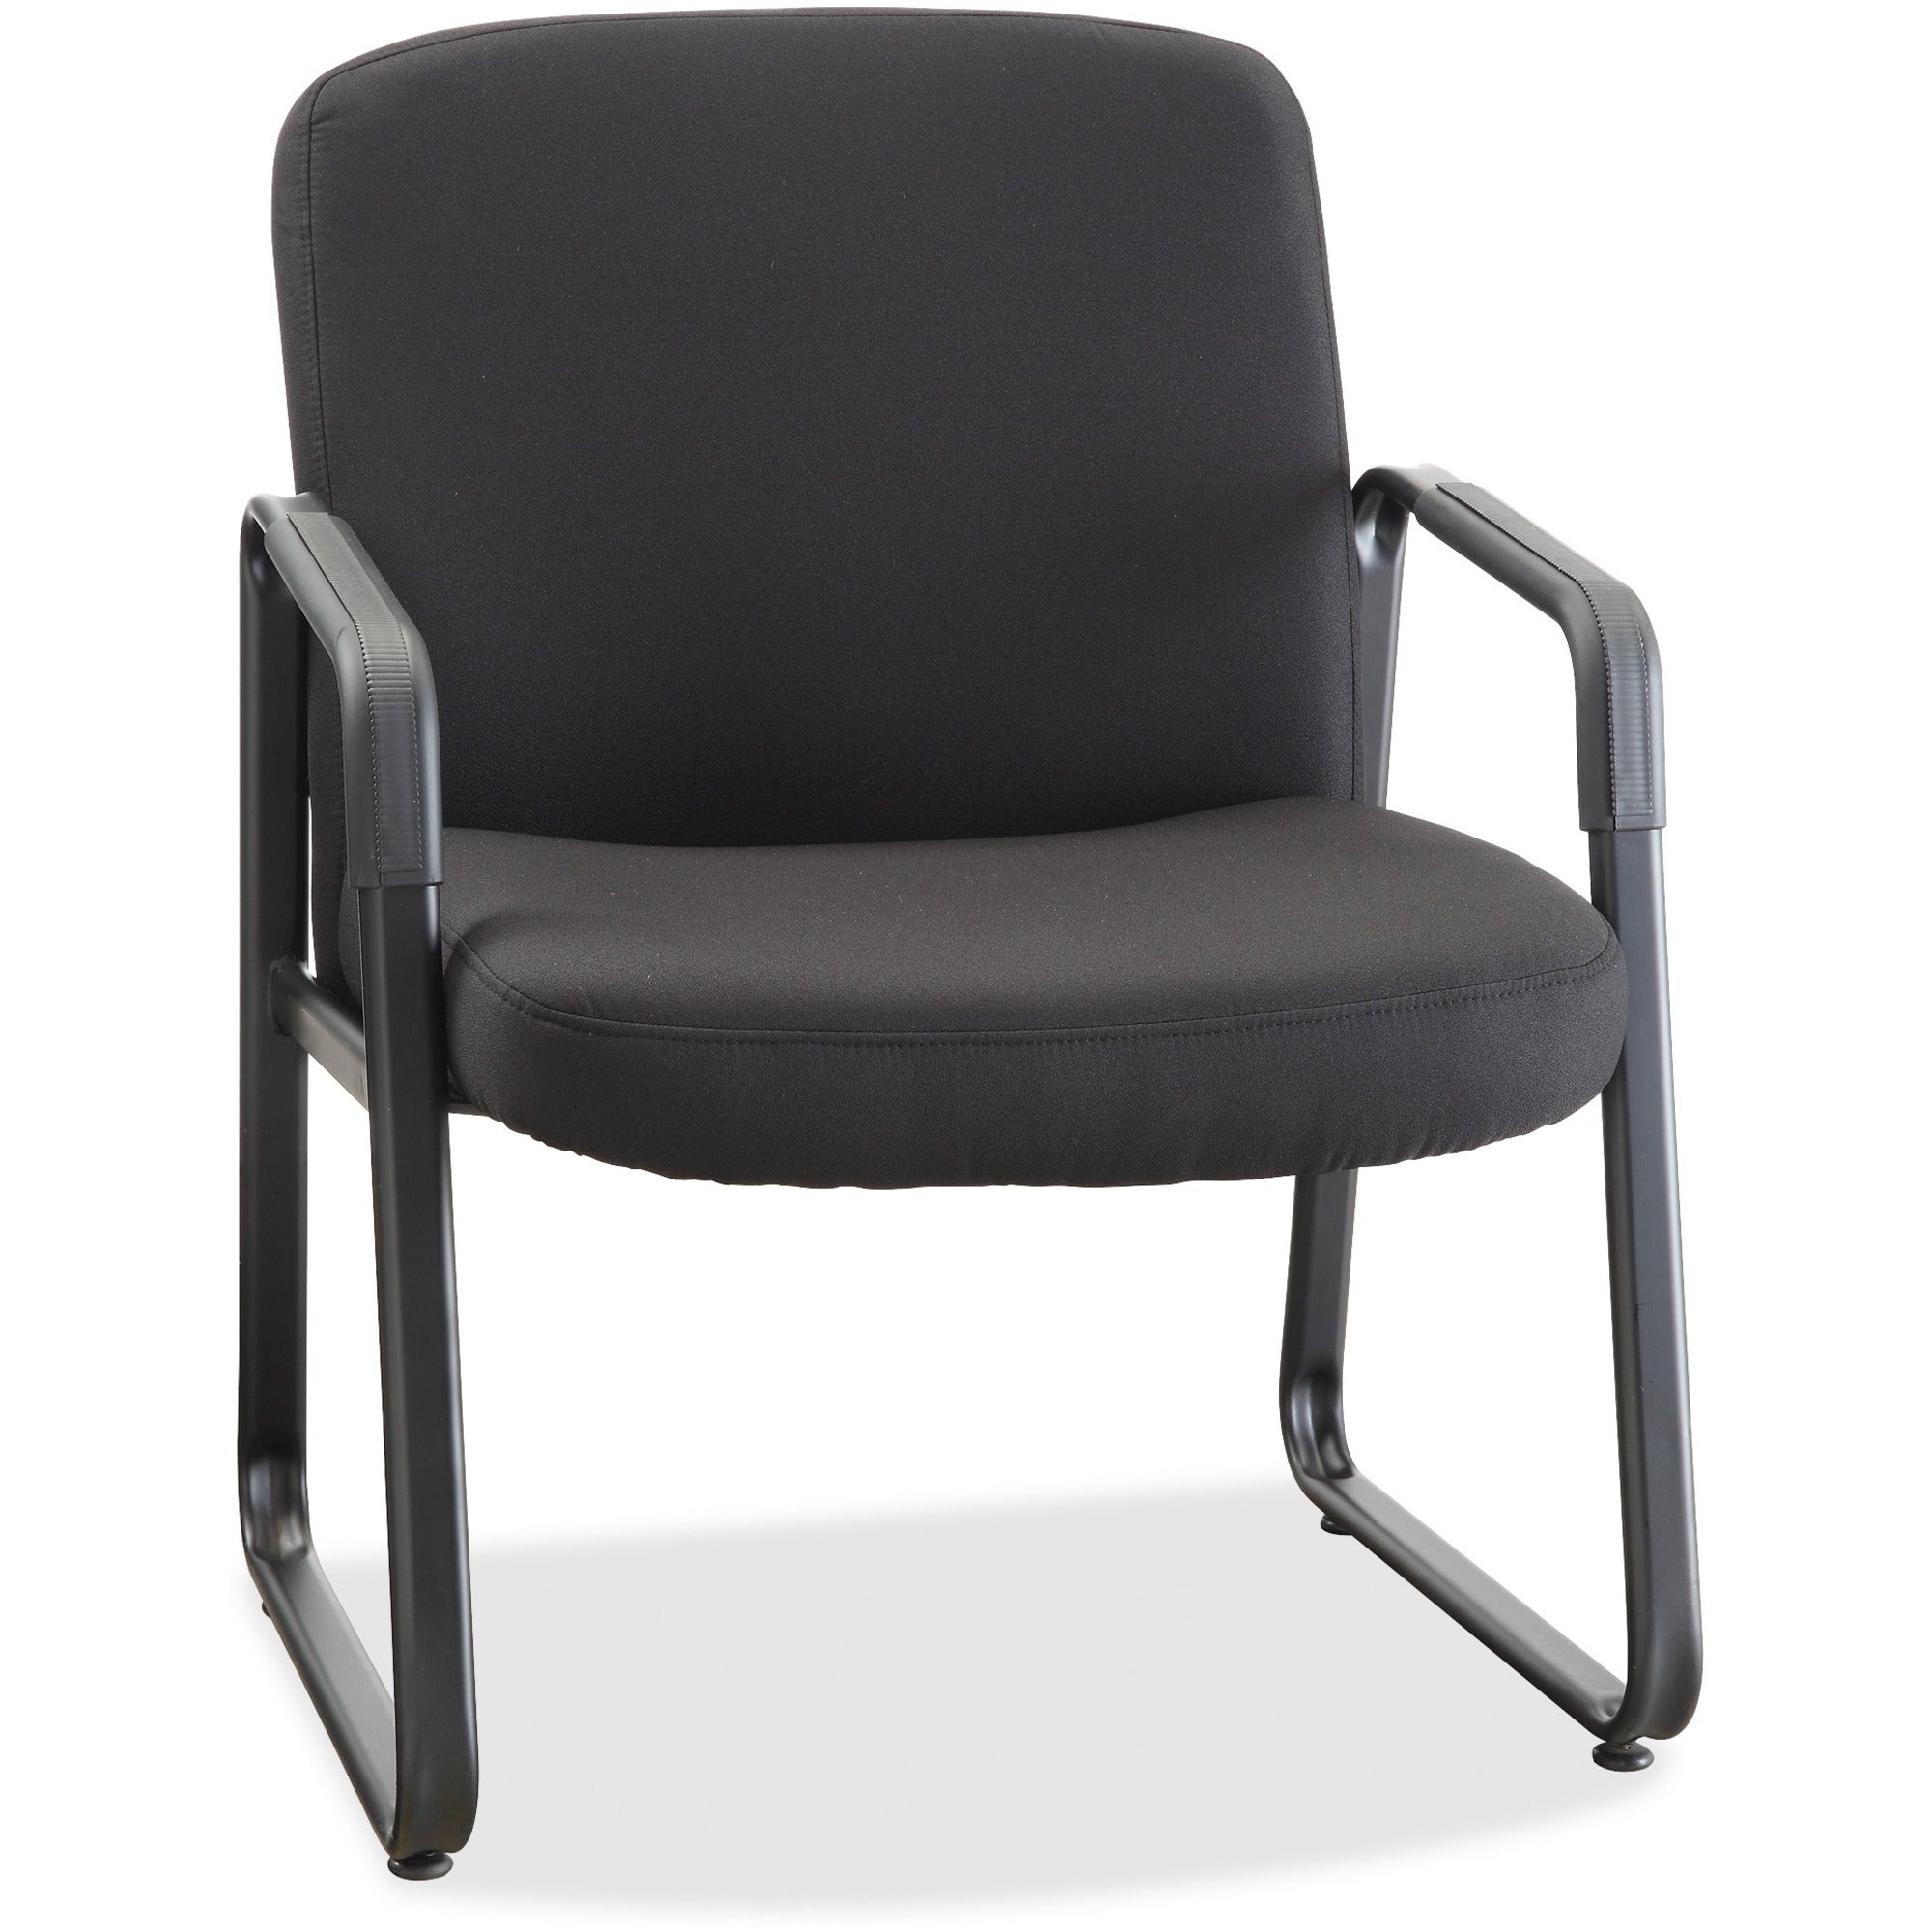 lorell-big-&-tall-upholstered-guest-chair-black-plywood-fabric-seat-black-plywood-fabric-back-powder-coated-metal-frame-sled-base-1-each_llr84586 - 1